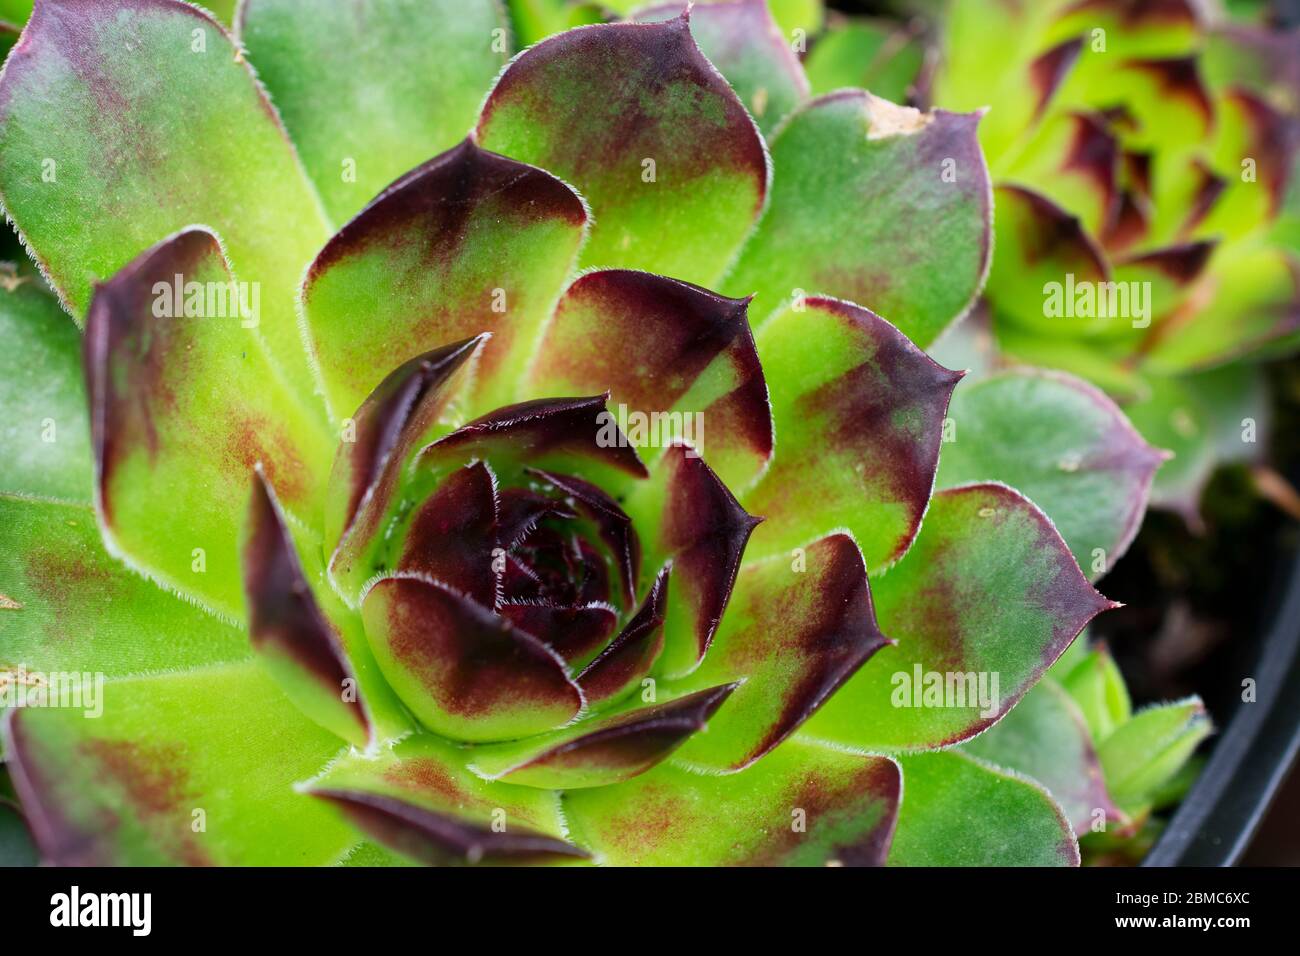 Easily grown Sempervivum Tectorum, also known as Hens and Chicks plant, one of natures hardy succulent plants with geometrically growing leaves. -01 Stock Photo